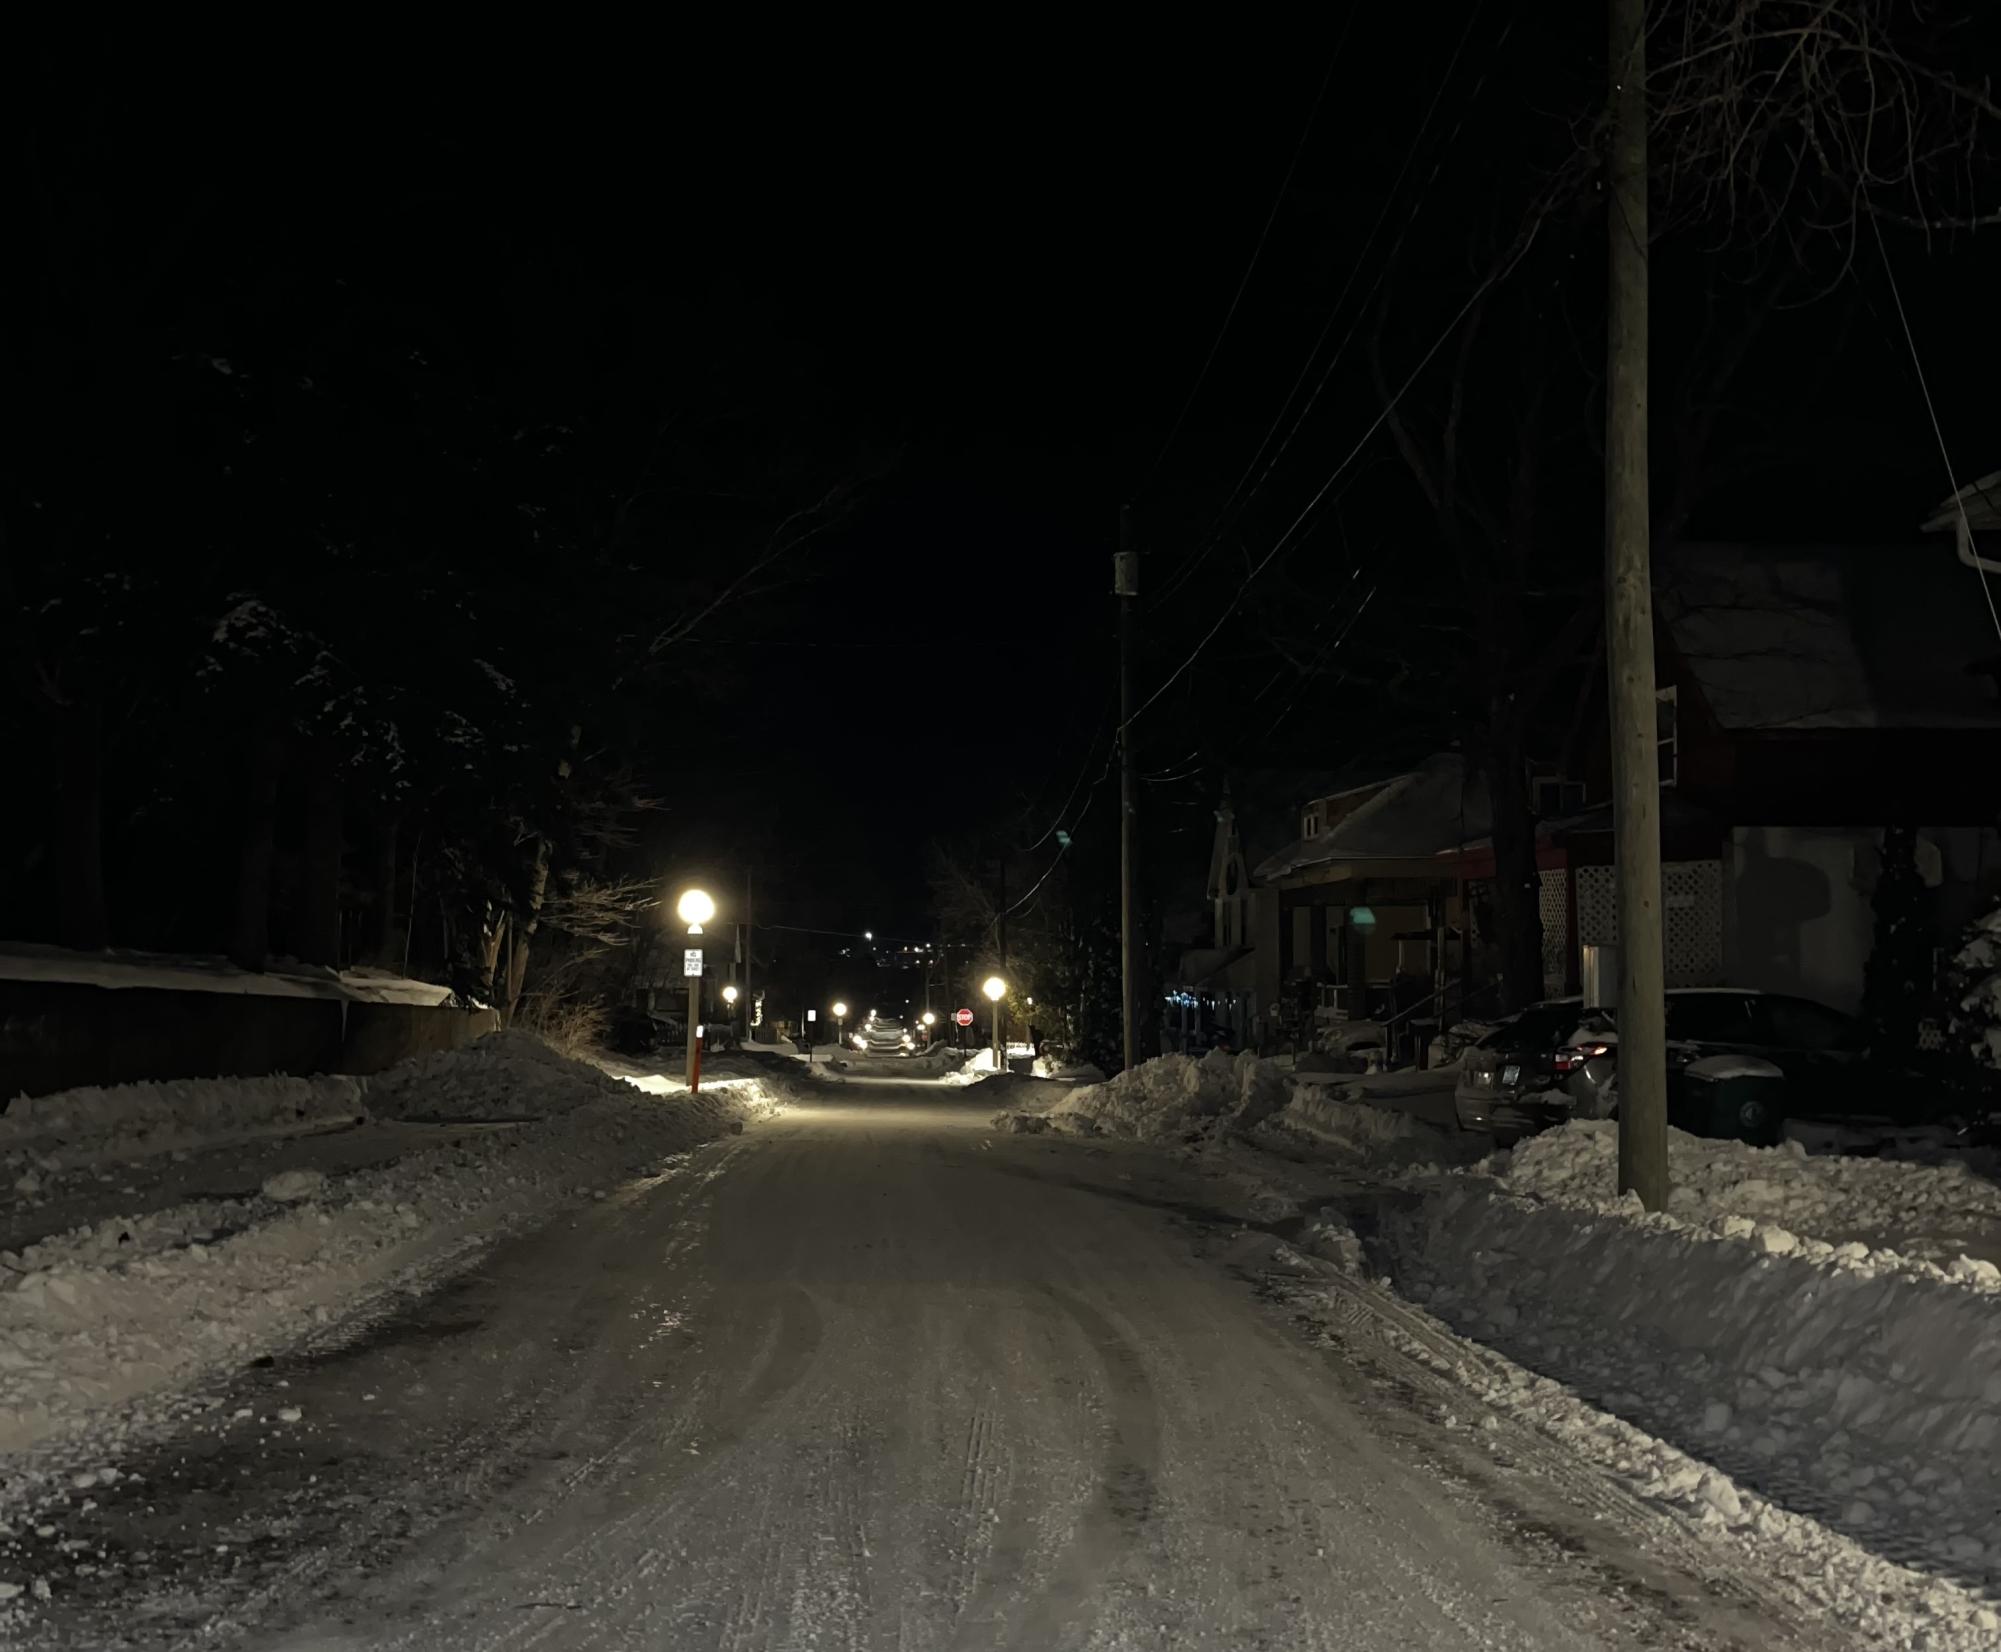 SNOWBANK CITY — My morning walk to campus. Obstacles include darkness that only yields to the occasional street lamp and snowbanks piled higher than my kees. 